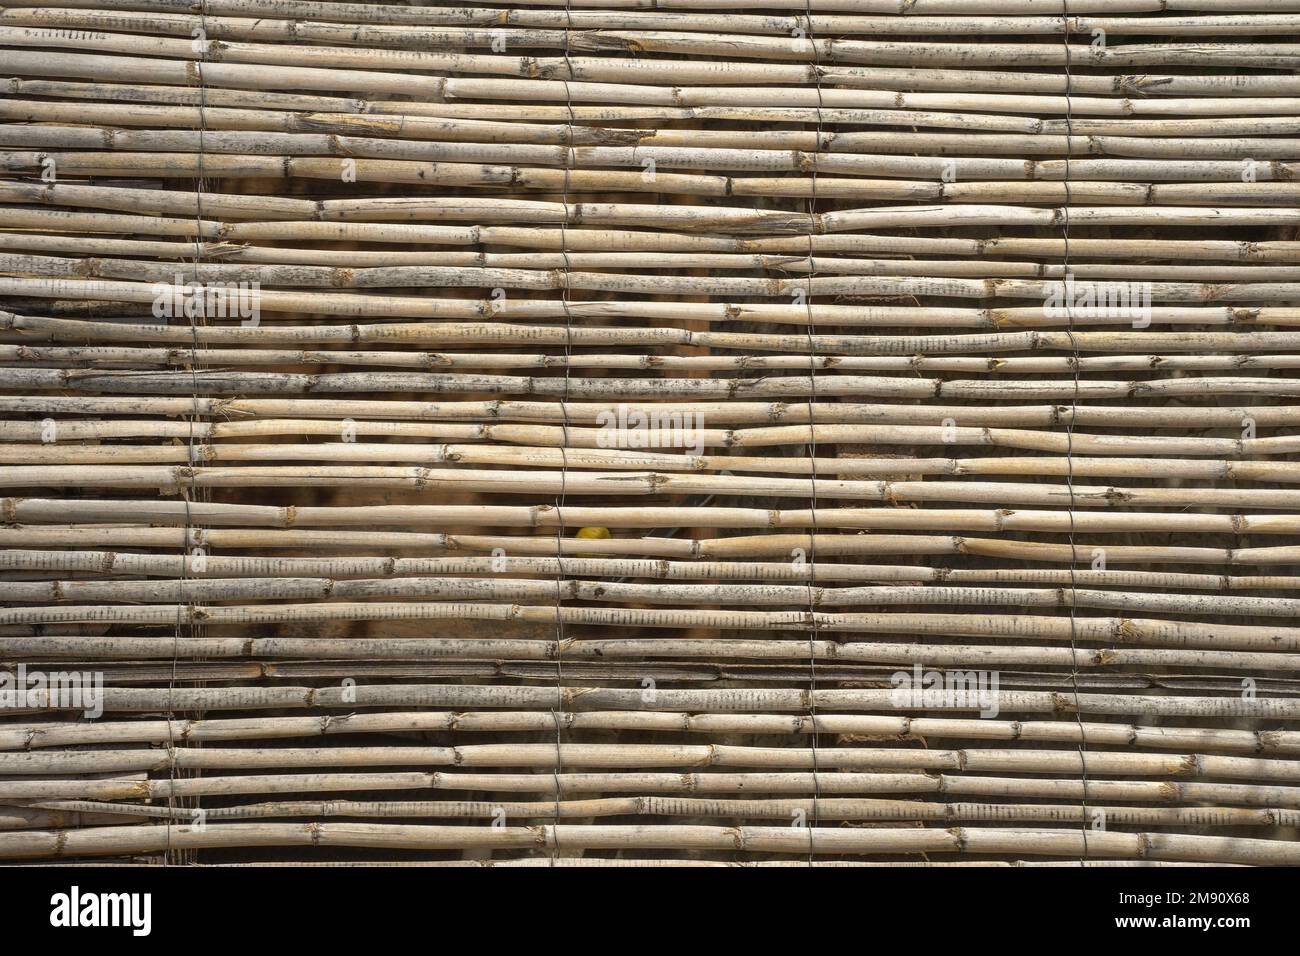 rooftop cover of reed sticks pattern. Stock Photo